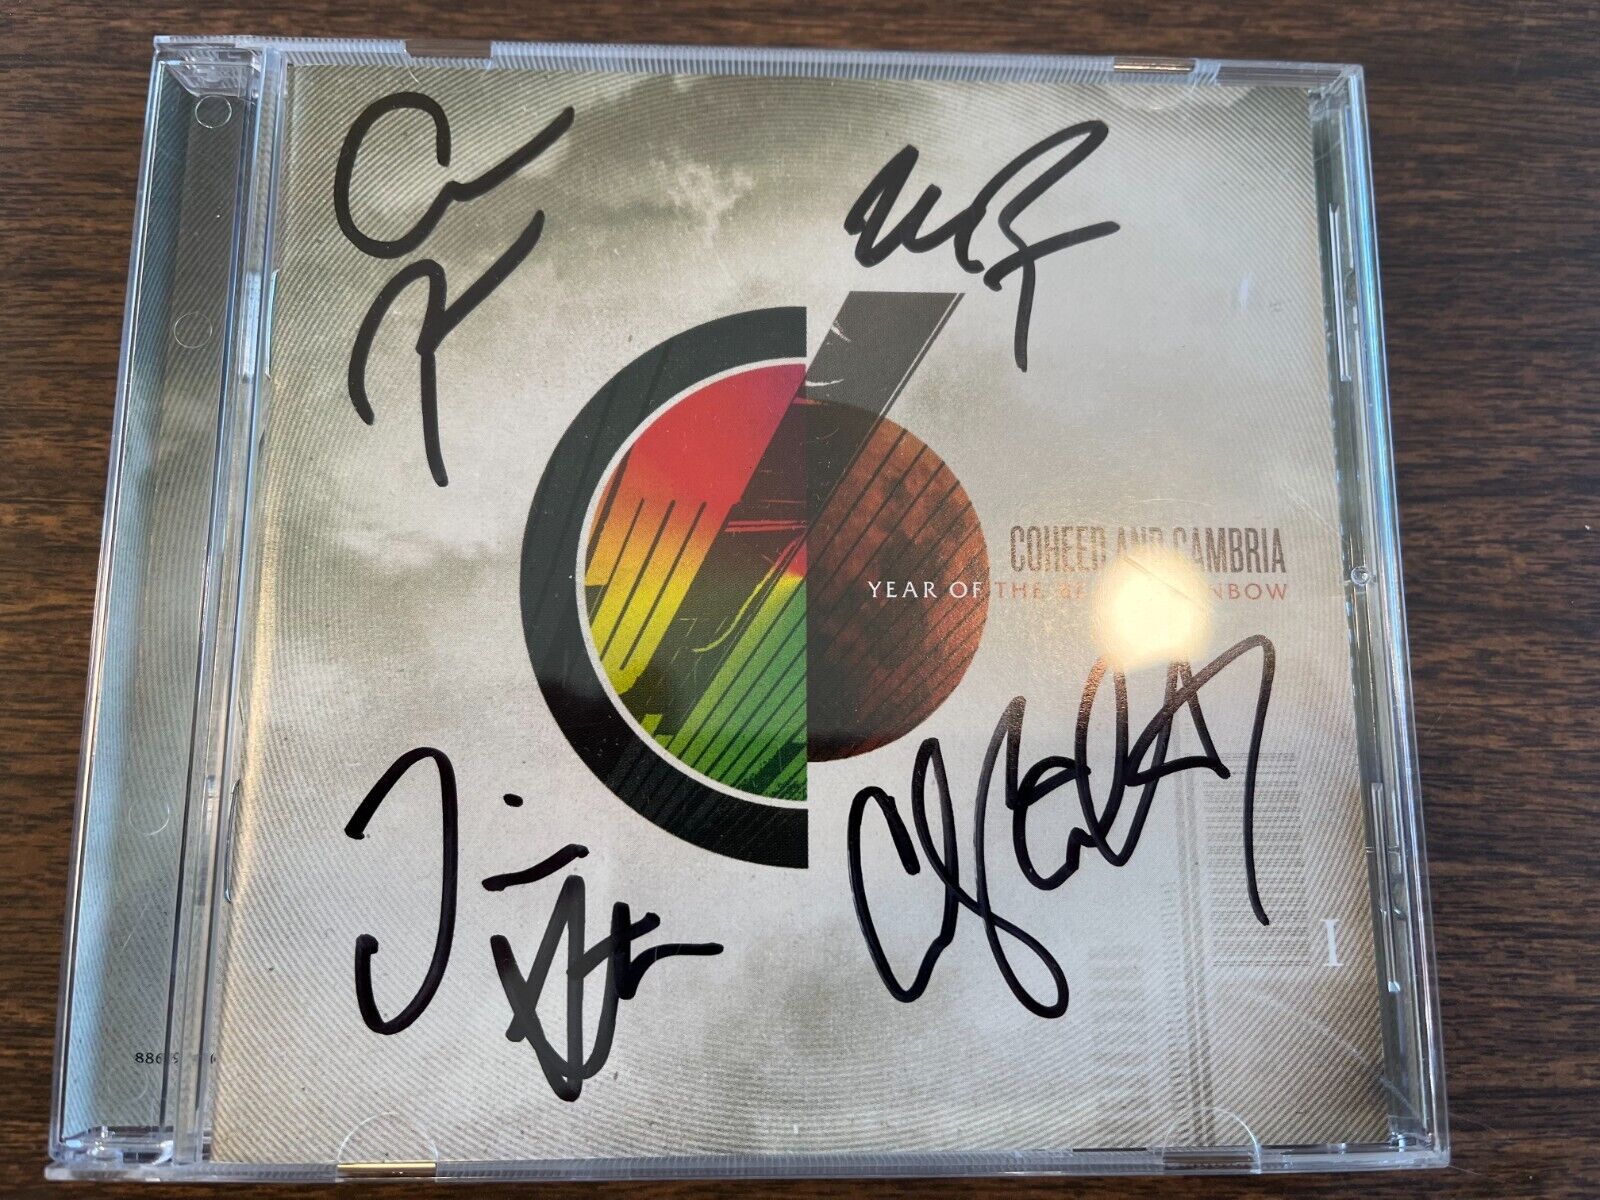 Coheed & Cambria year of the black rainbow signed CD